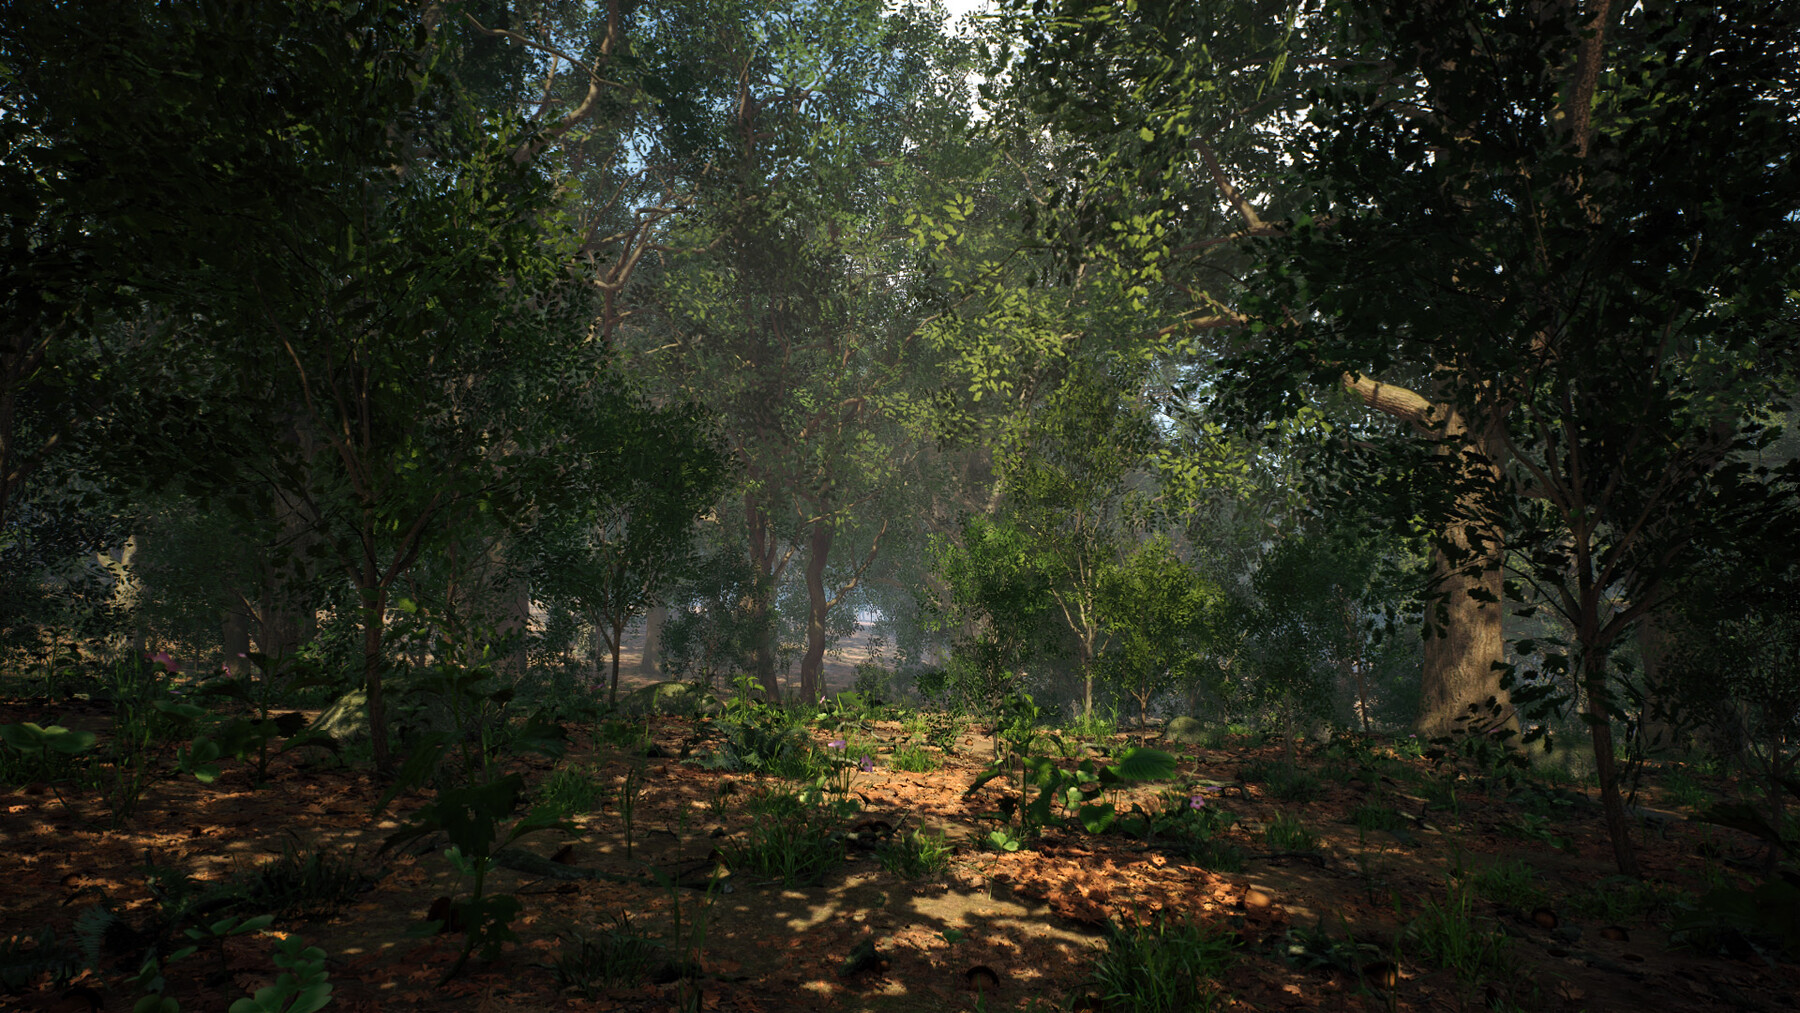 Leaf Tree Forest Biome in Environments - UE Marketplace